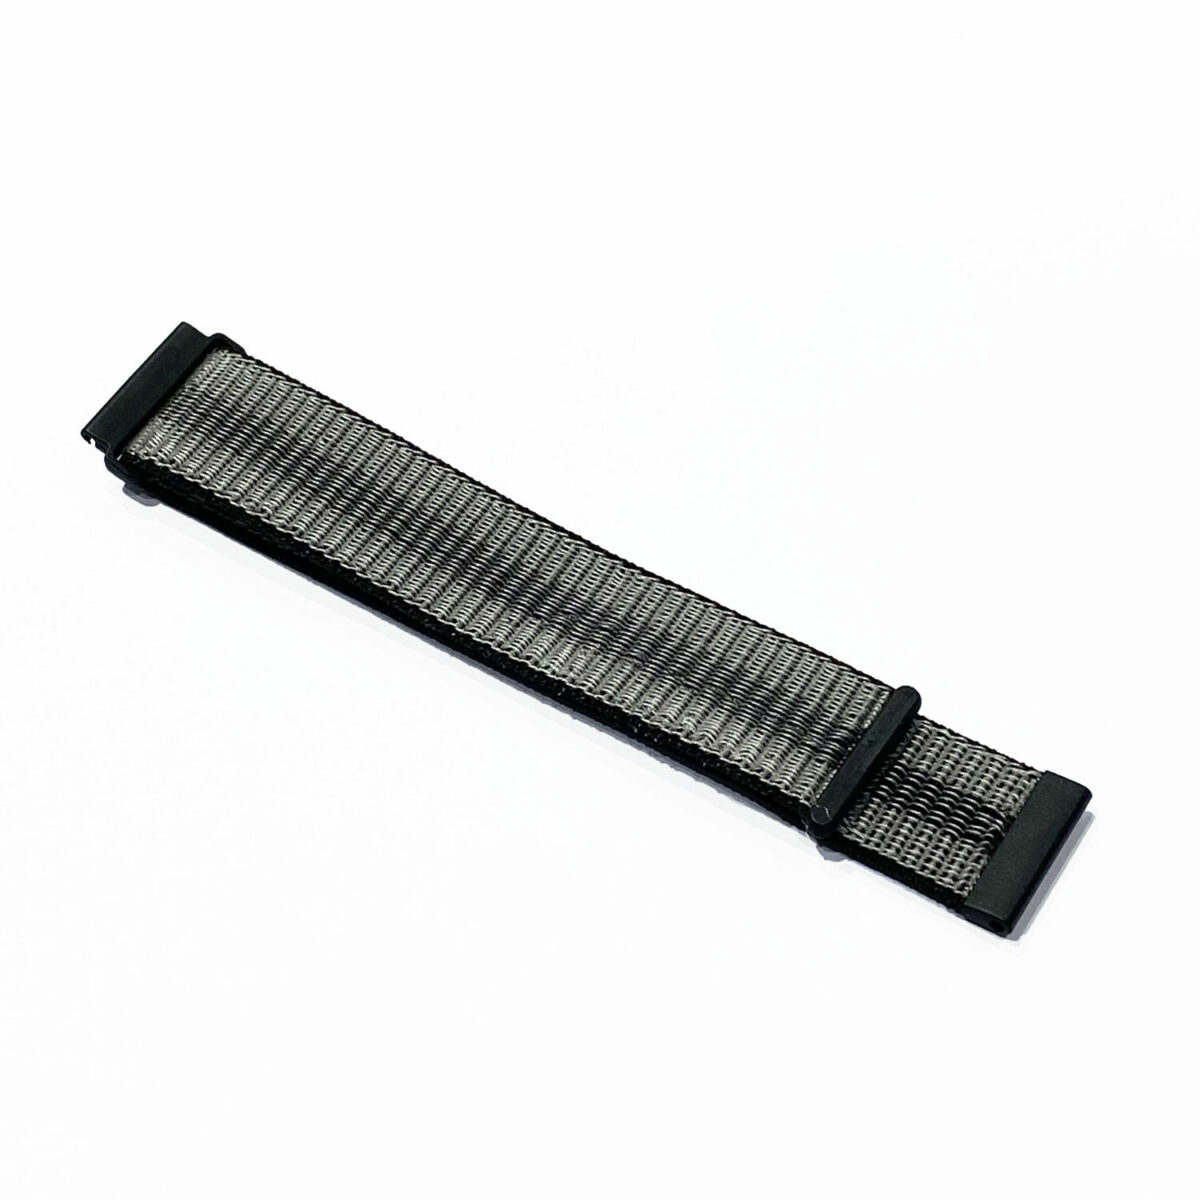 day dong ho quick release nylon band 60 Dây đồng hồ QR Nylon Sport Loop 20mm - Forerunner 245 / Coros Pace 2 / Apex 42 - YCB.vn